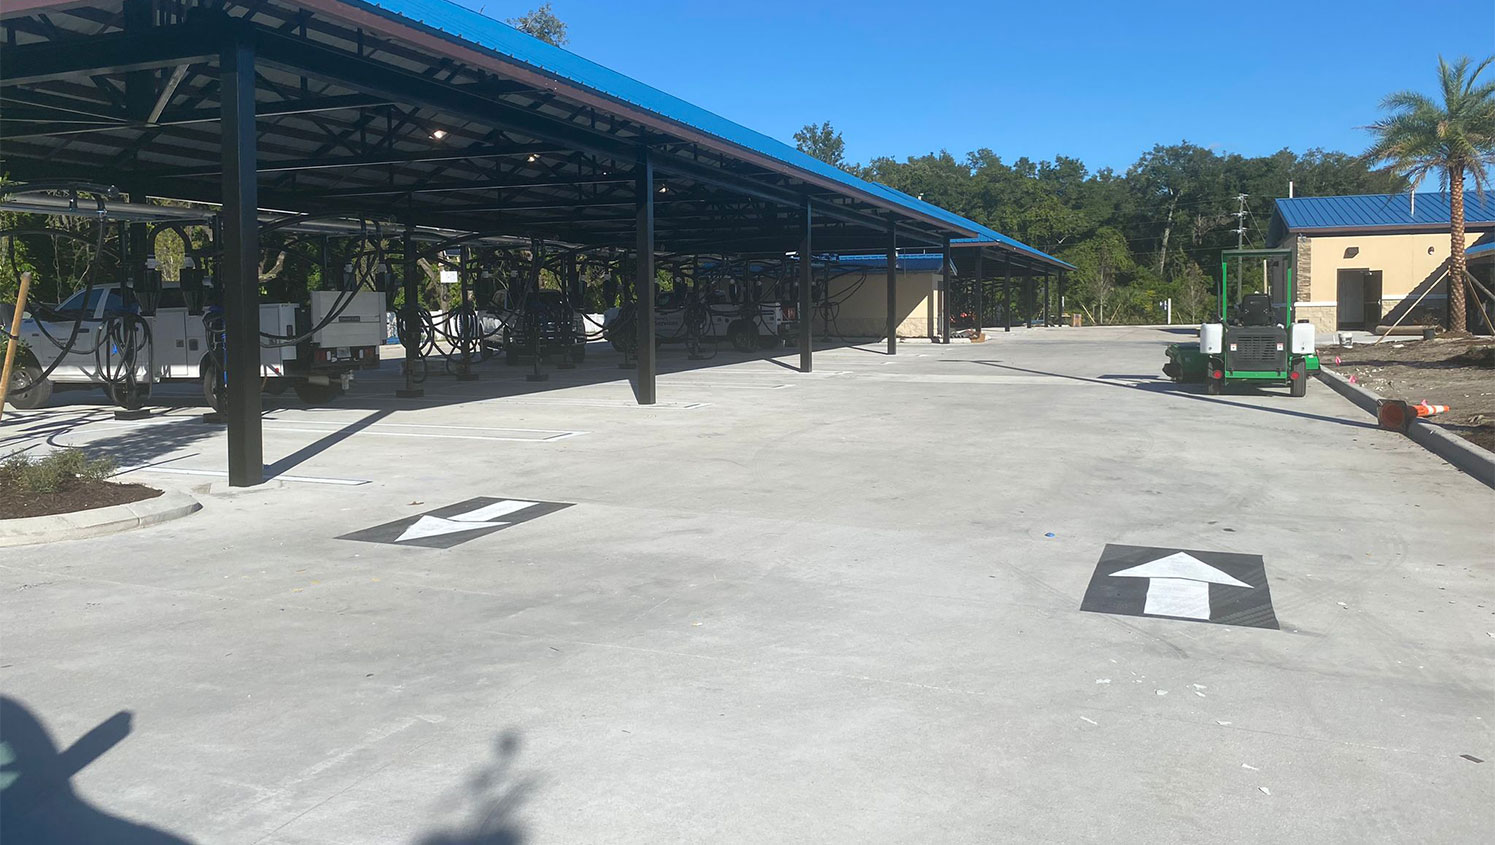 directional arrows painted in car wash parking lot